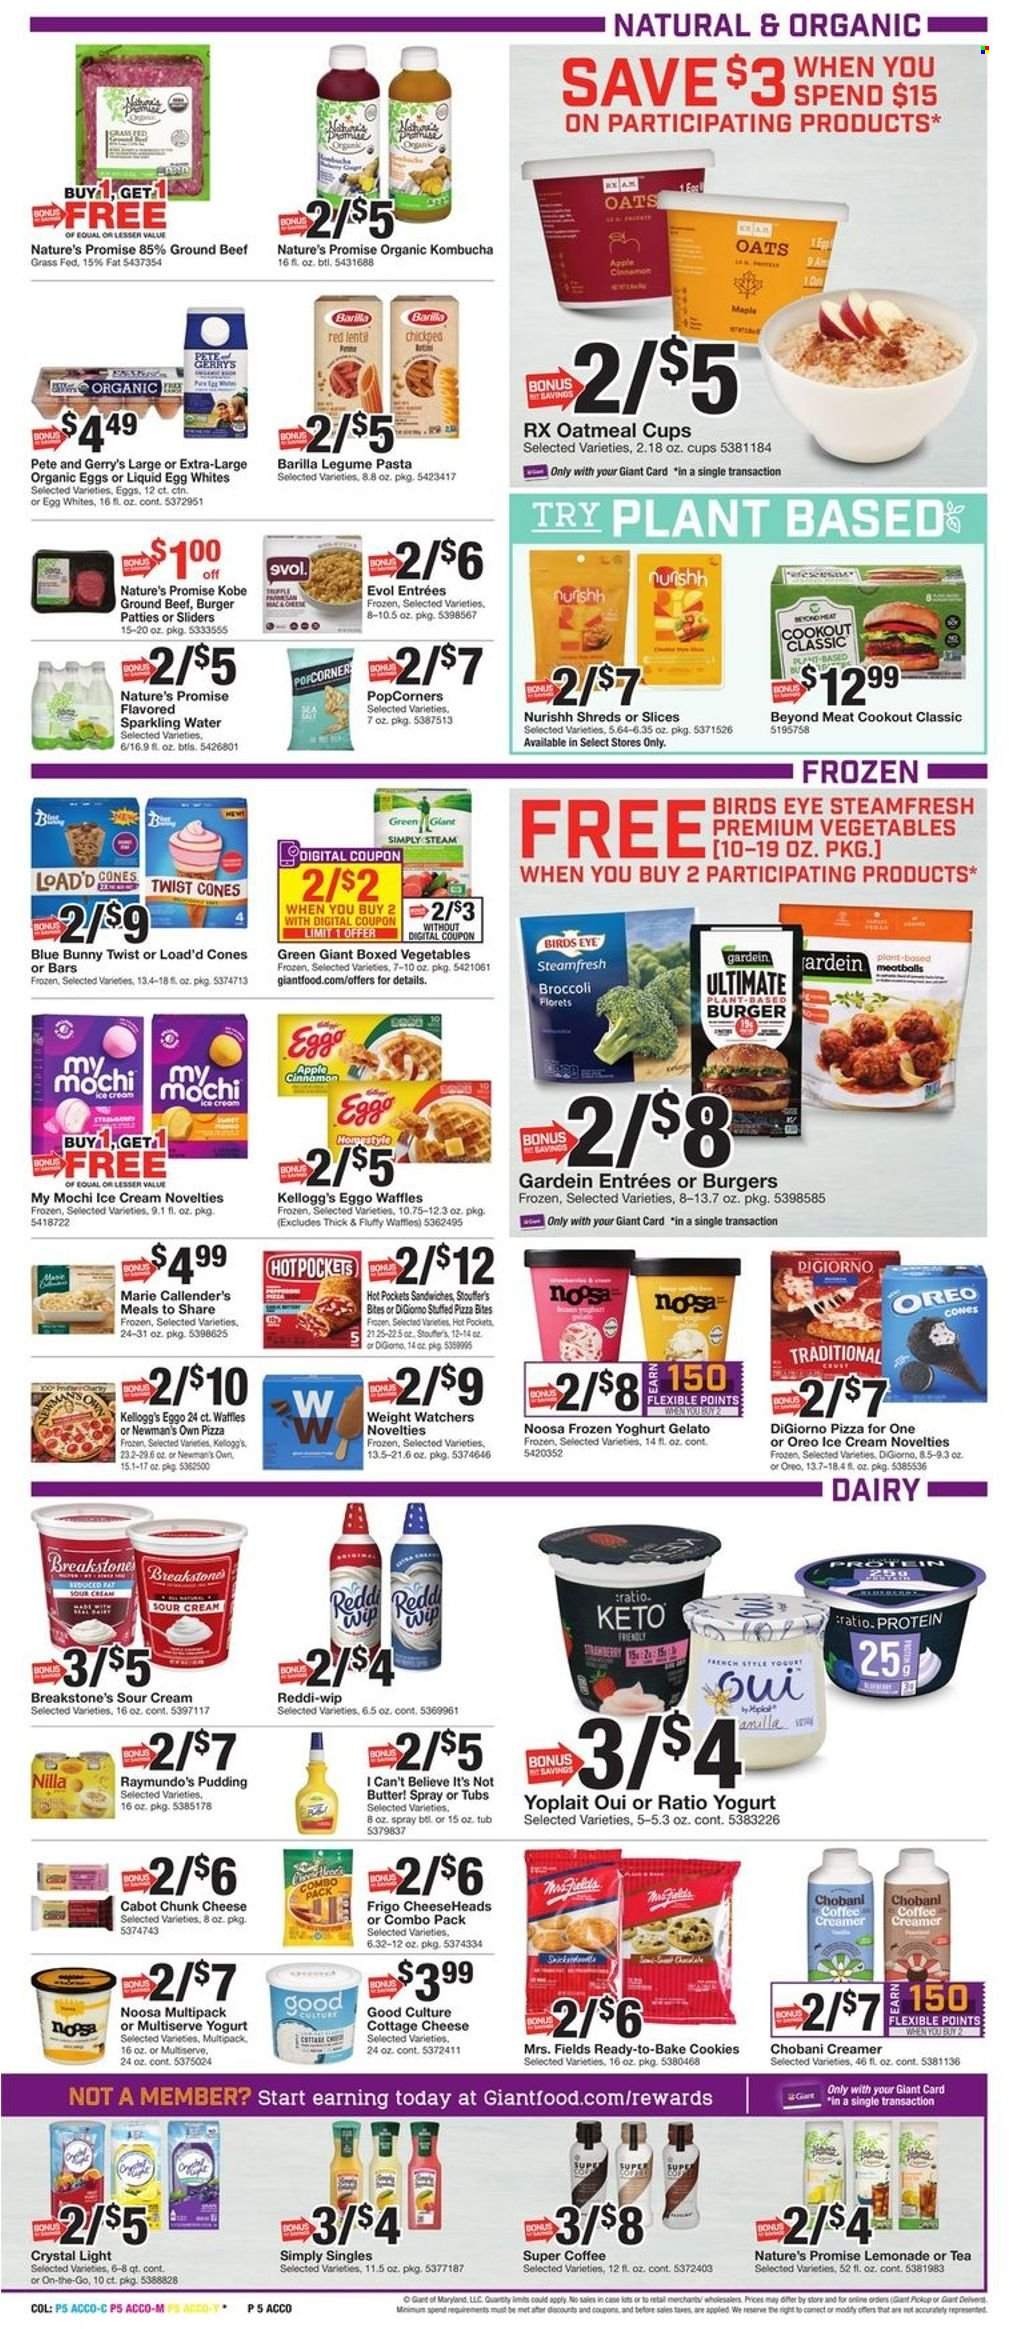 thumbnail - Giant Food Flyer - 05/20/2022 - 05/26/2022 - Sales products - Nature’s Promise, waffles, broccoli, hot pocket, pizza, sandwich, pasta, Bird's Eye, Barilla, Marie Callender's, cottage cheese, chunk cheese, pudding, Oreo, yoghurt, Yoplait, Chobani, butter, I Can't Believe It's Not Butter, sour cream, creamer, ice cream, gelato, Blue Bunny, frozen yoghurt, Stouffer's, cookies, Kellogg's, popcorn, oatmeal, oats, cinnamon, lemonade, sparkling water, kombucha, tea, beef meat, ground beef, burger patties, cup. Page 5.